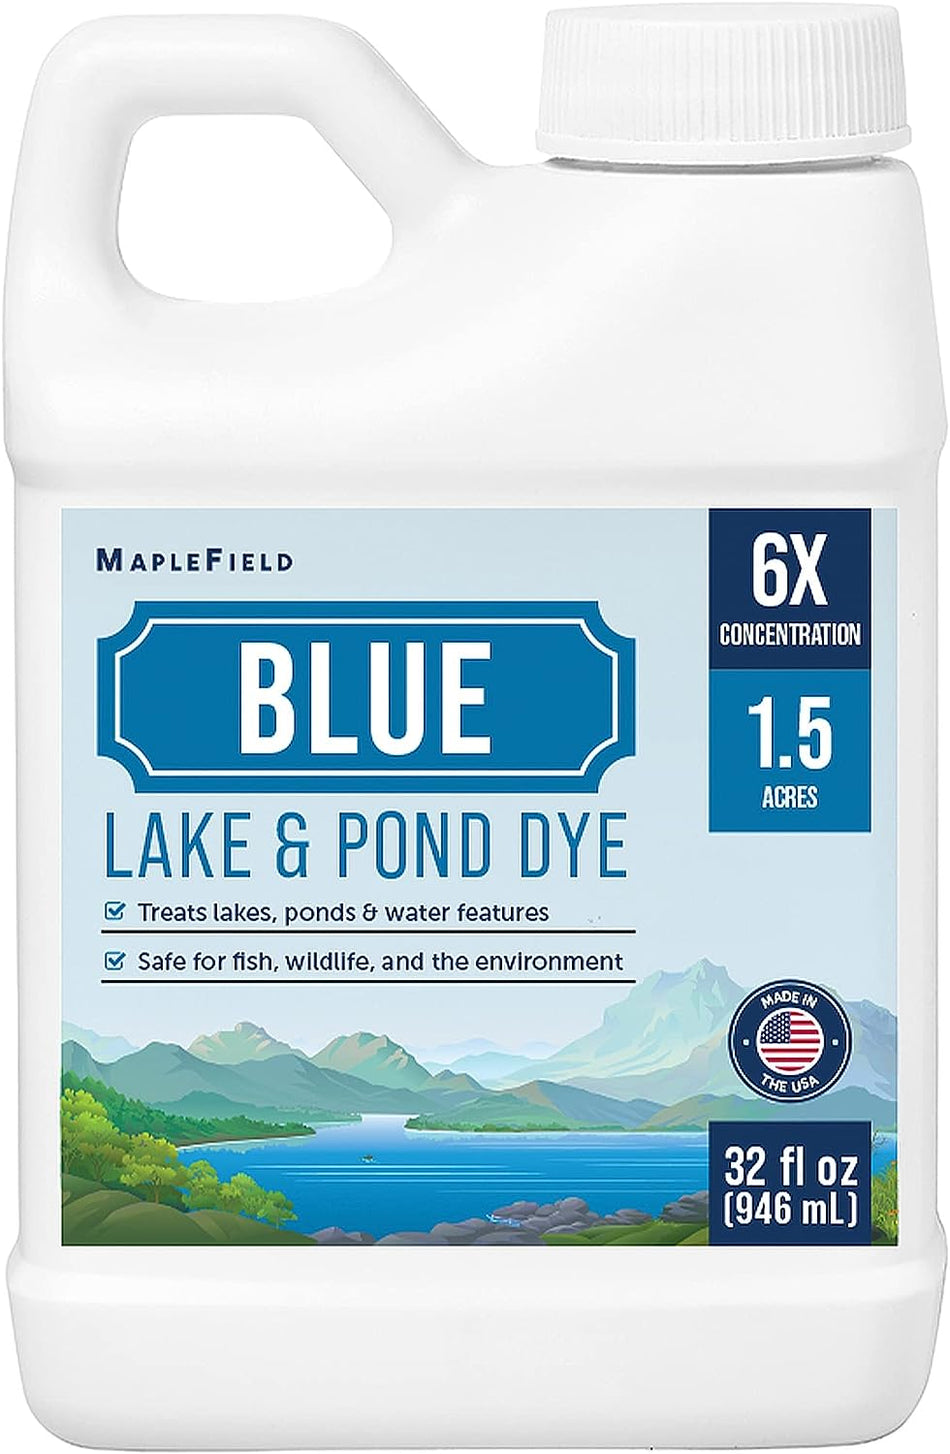 6X Concentrated Blue Lake & Pond Dye - 32 Oz